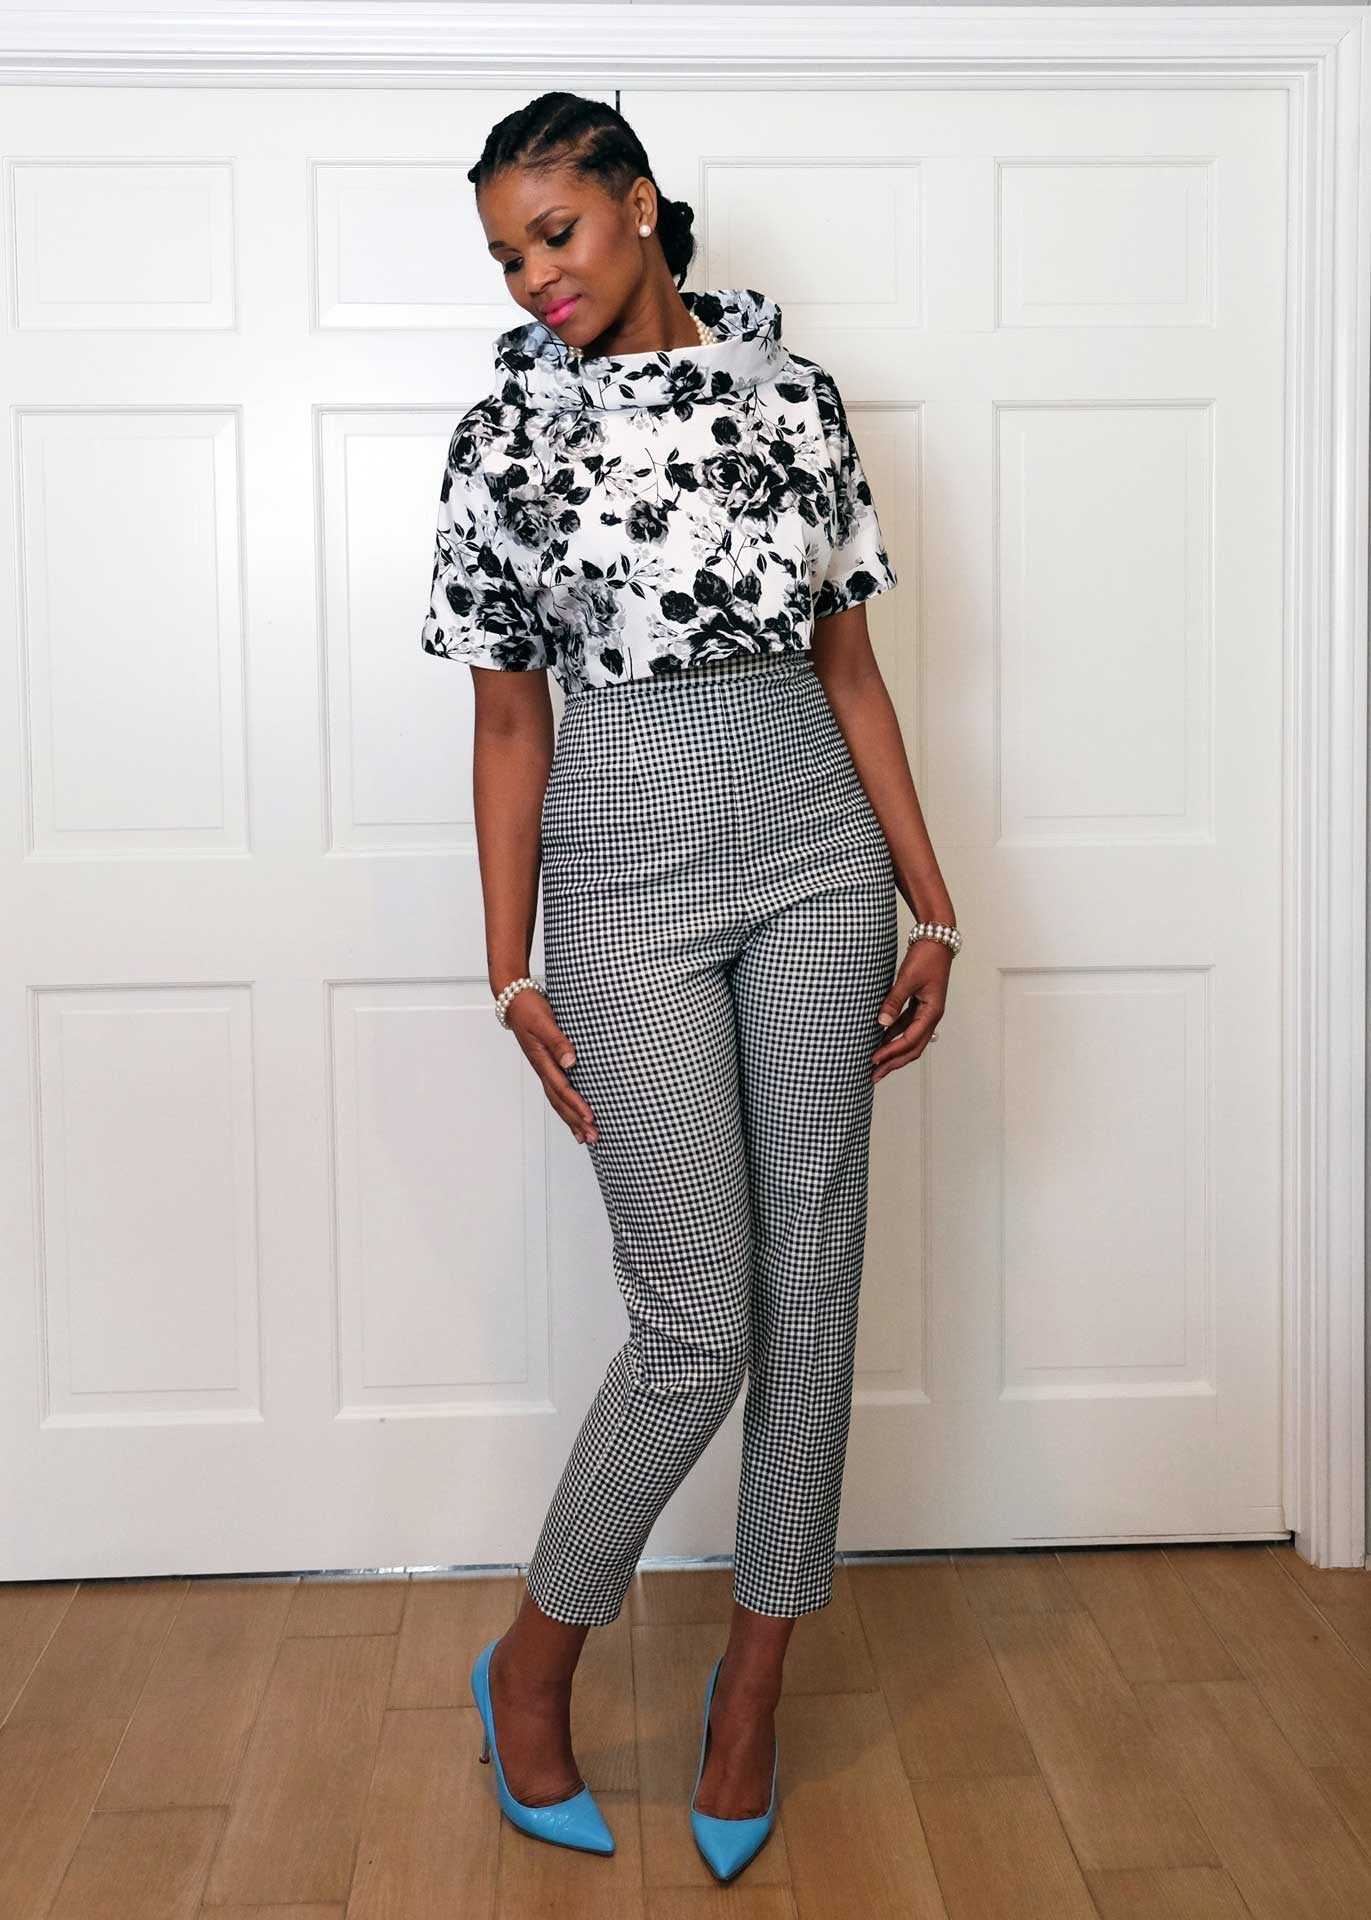 Sleek & Sophisticated: The Cigarette pants – ChicGlamStyle